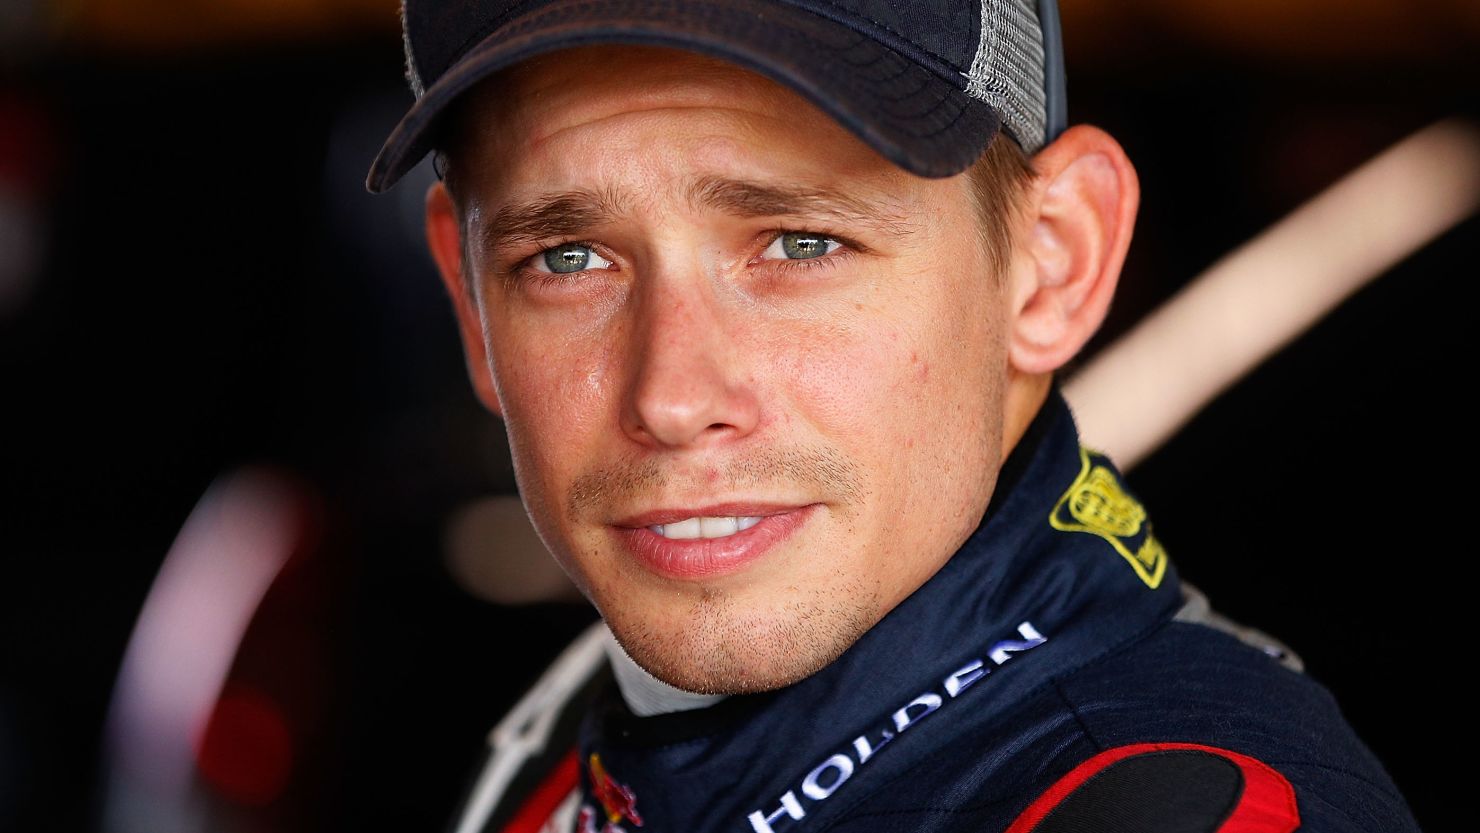 Casey Stoner is getting back on a bike to help Honda test its 2014 machines.